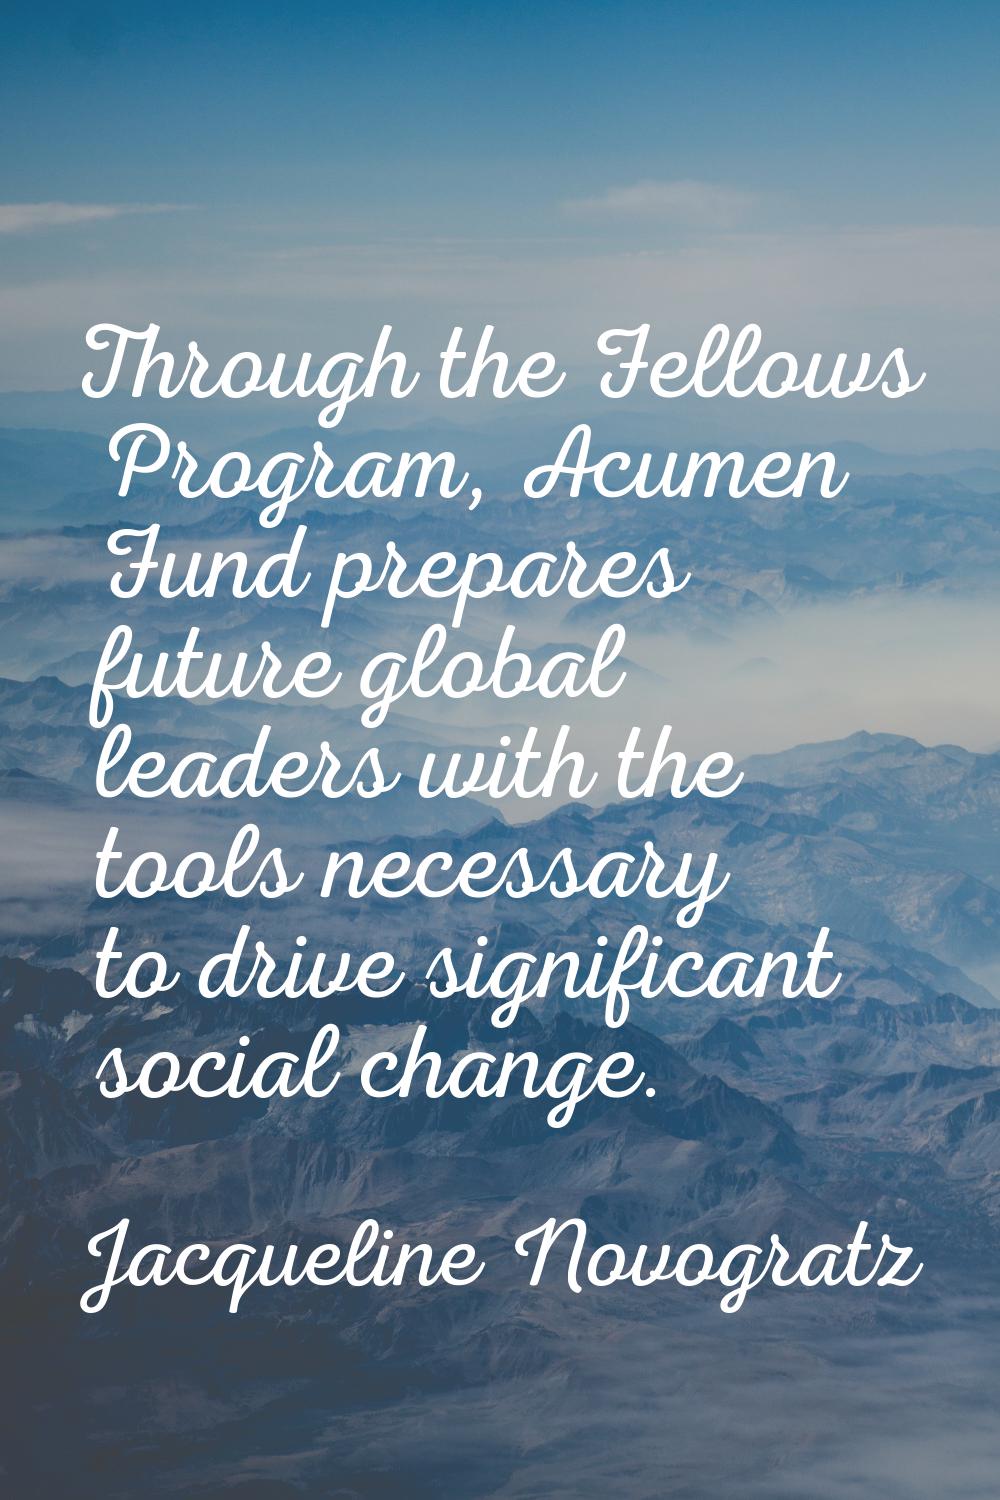 Through the Fellows Program, Acumen Fund prepares future global leaders with the tools necessary to